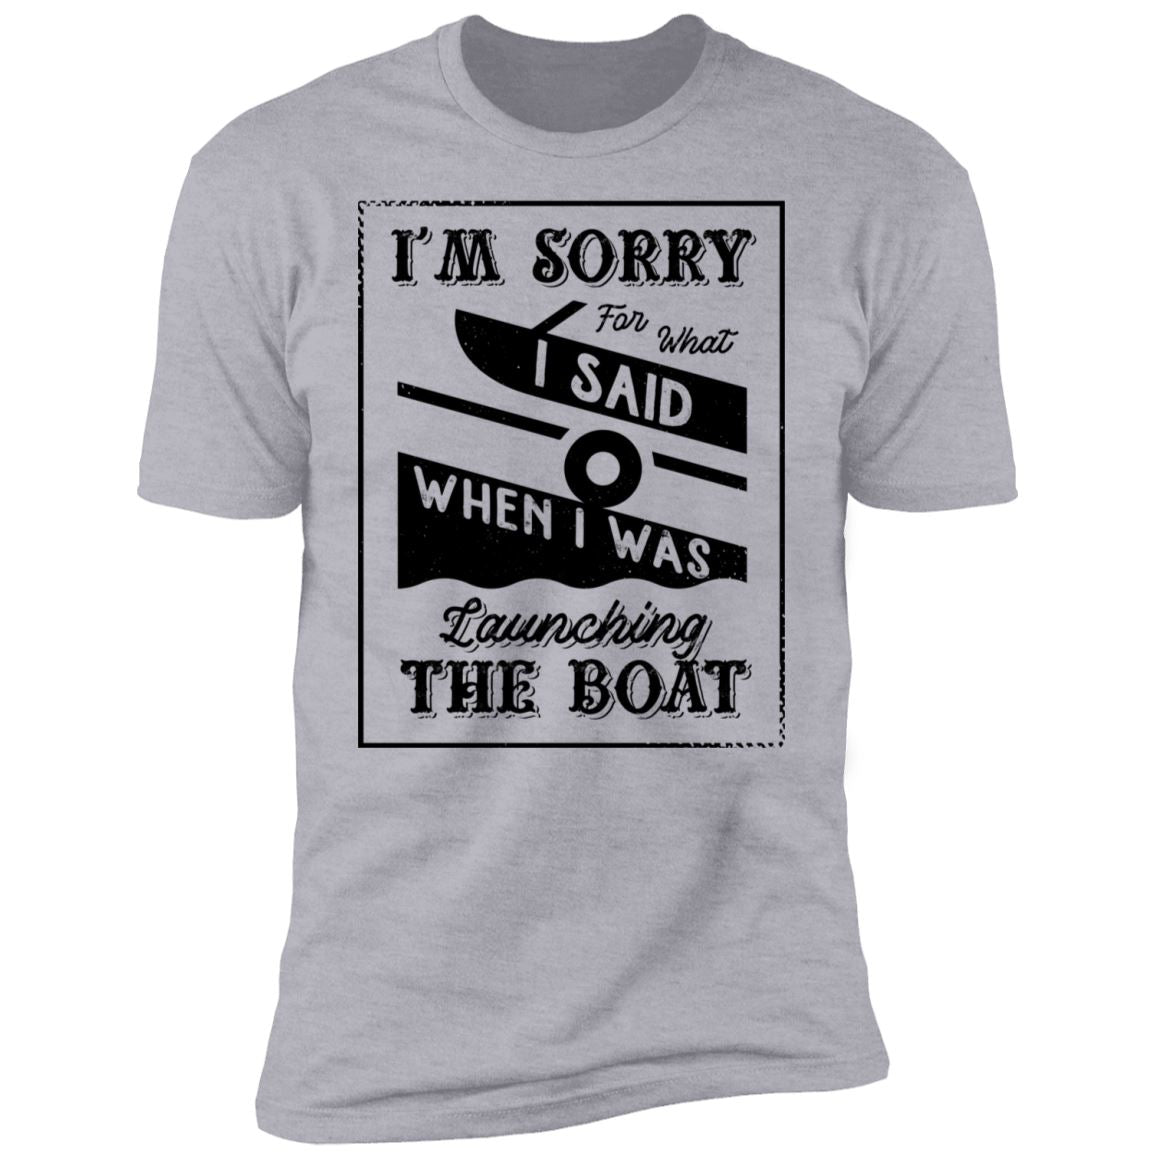 I'm Sorry For What I Said When I Was Launching The Boat Premium Short Sleeve T-Shirt - Houseboat Kings